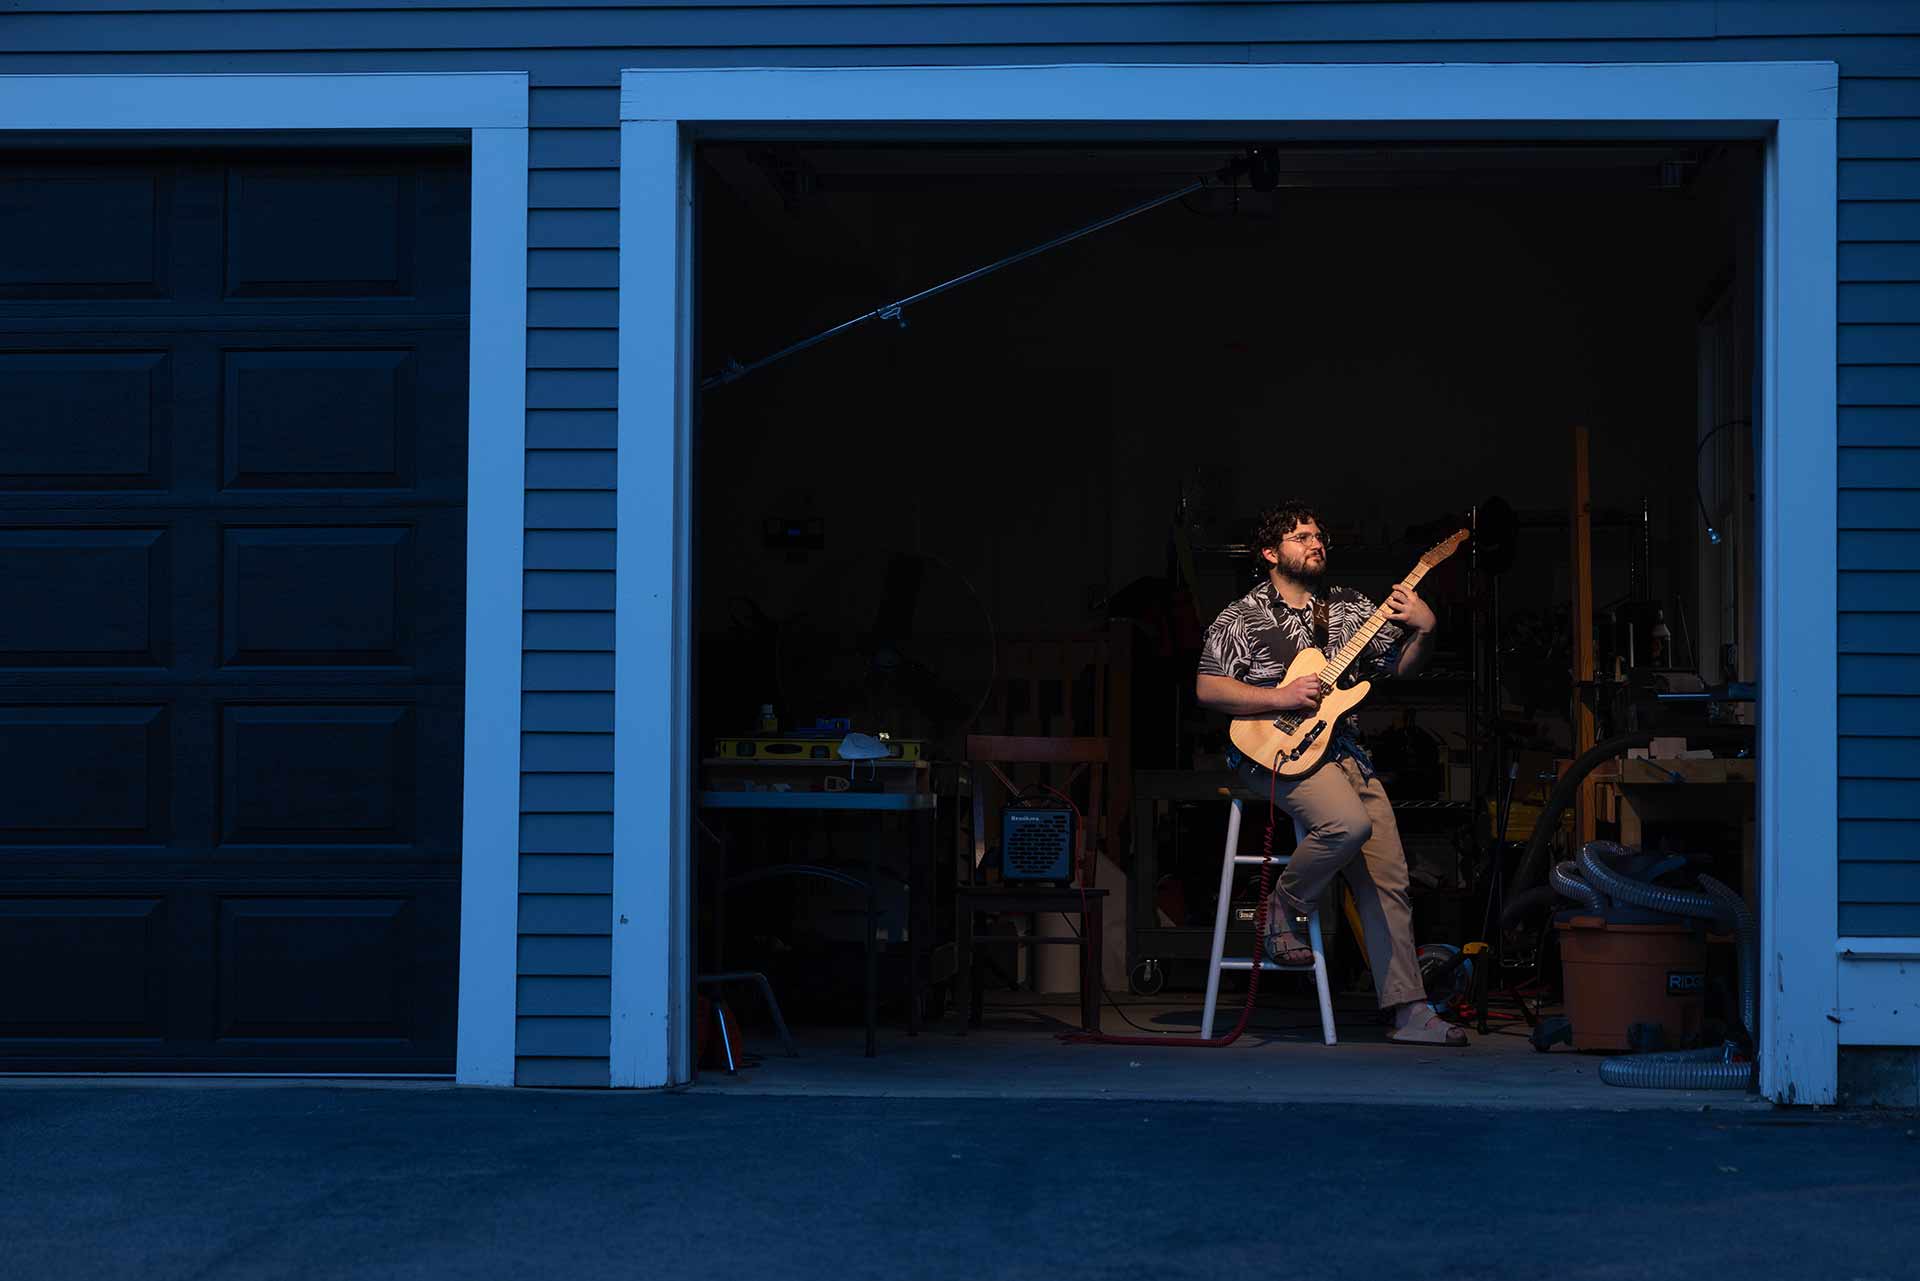 Sam sits on a stool, framed by the door of his garage. Light shines on him as he plays a guitar.